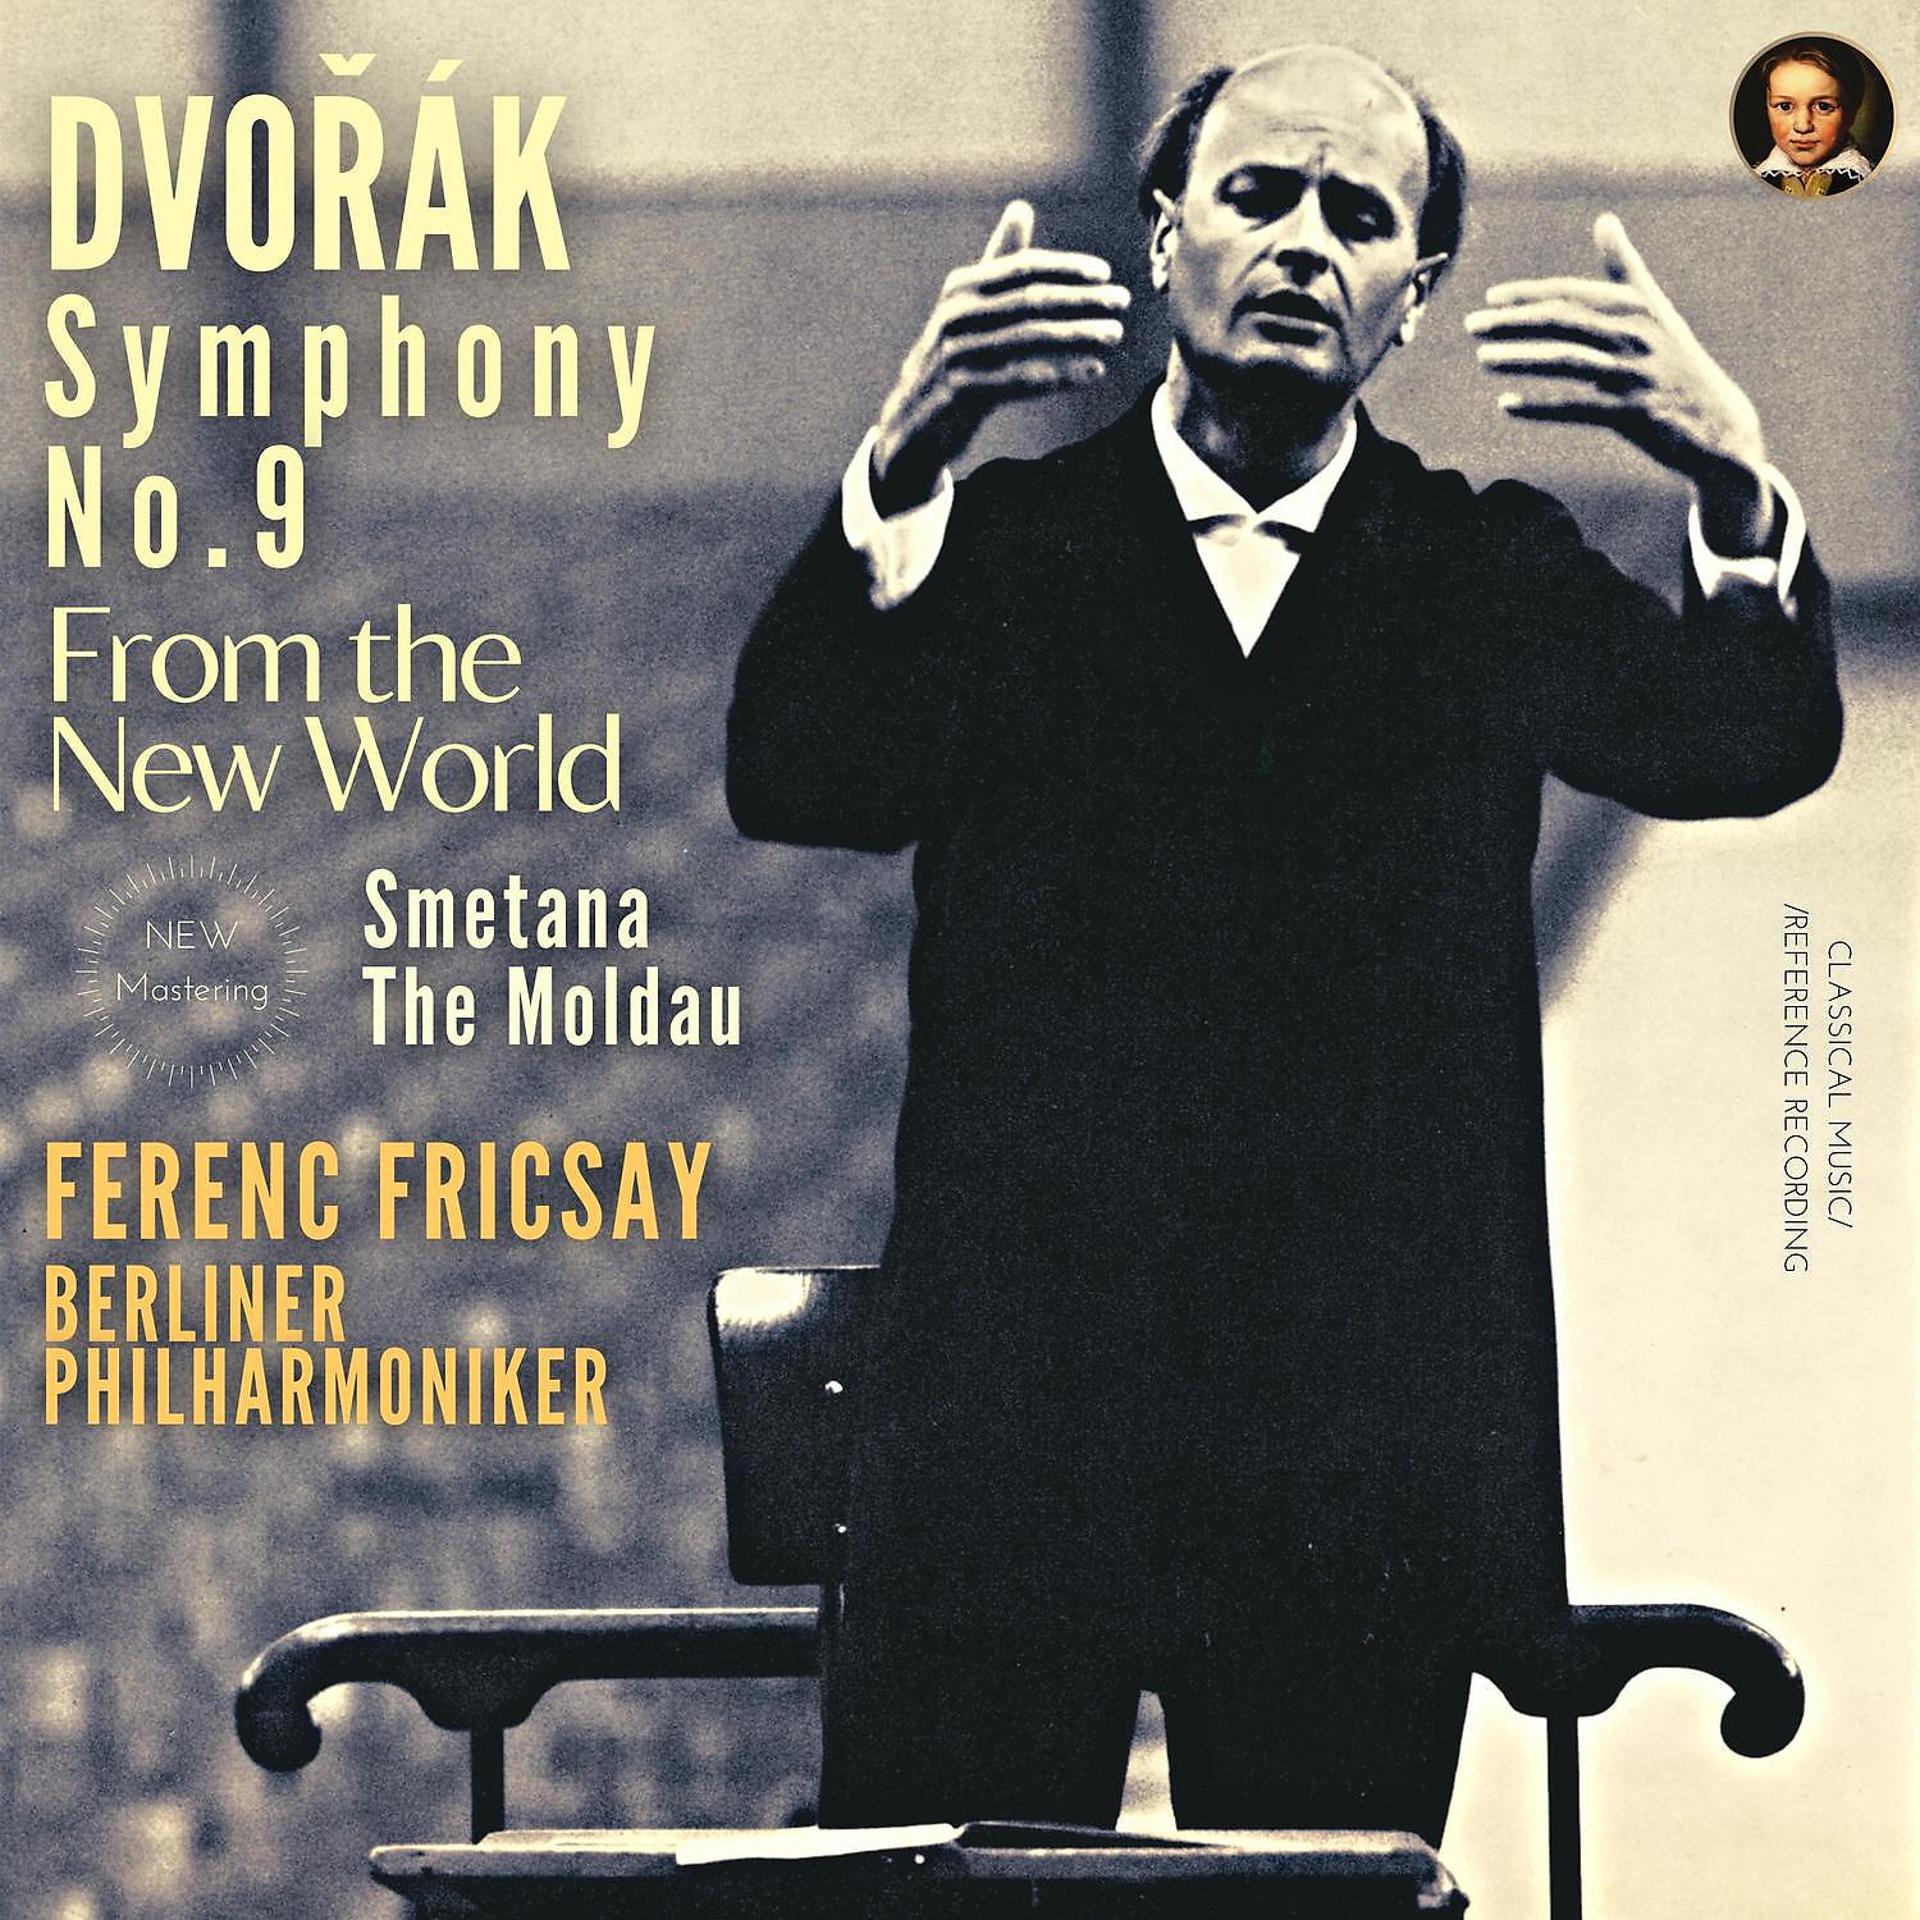 Постер альбома Dvořák: Symphony No. 9 in E minor, Op. 95 "From the New World" by Ferenc Fricsay